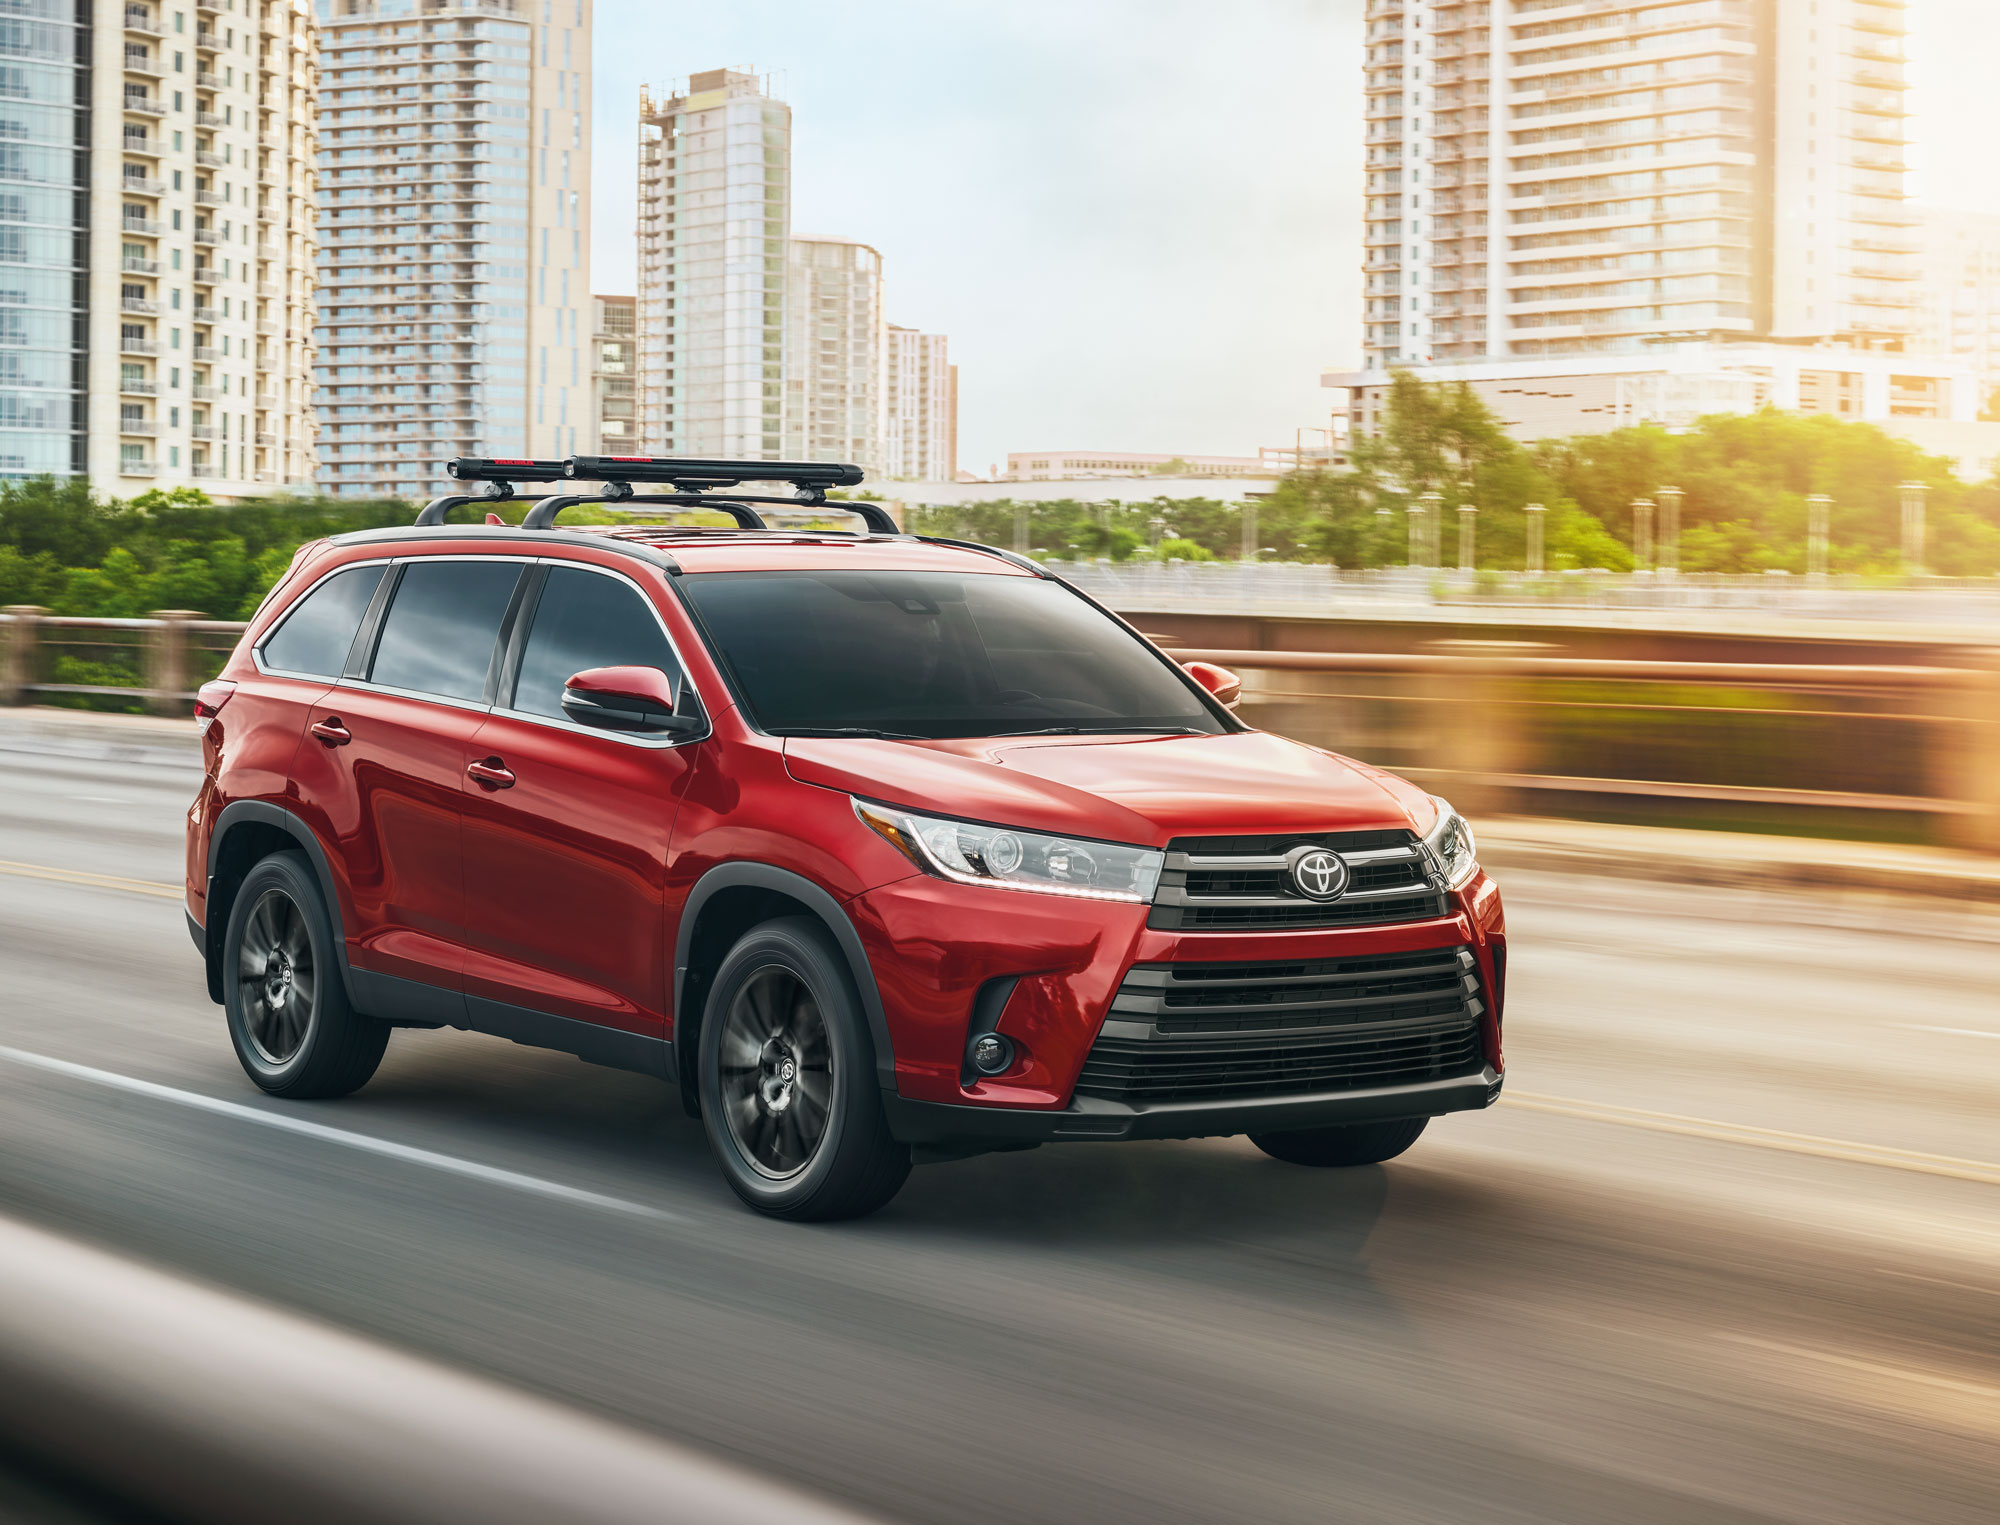 Image of a red 2019 Toyota Highlander driving on a city highway.